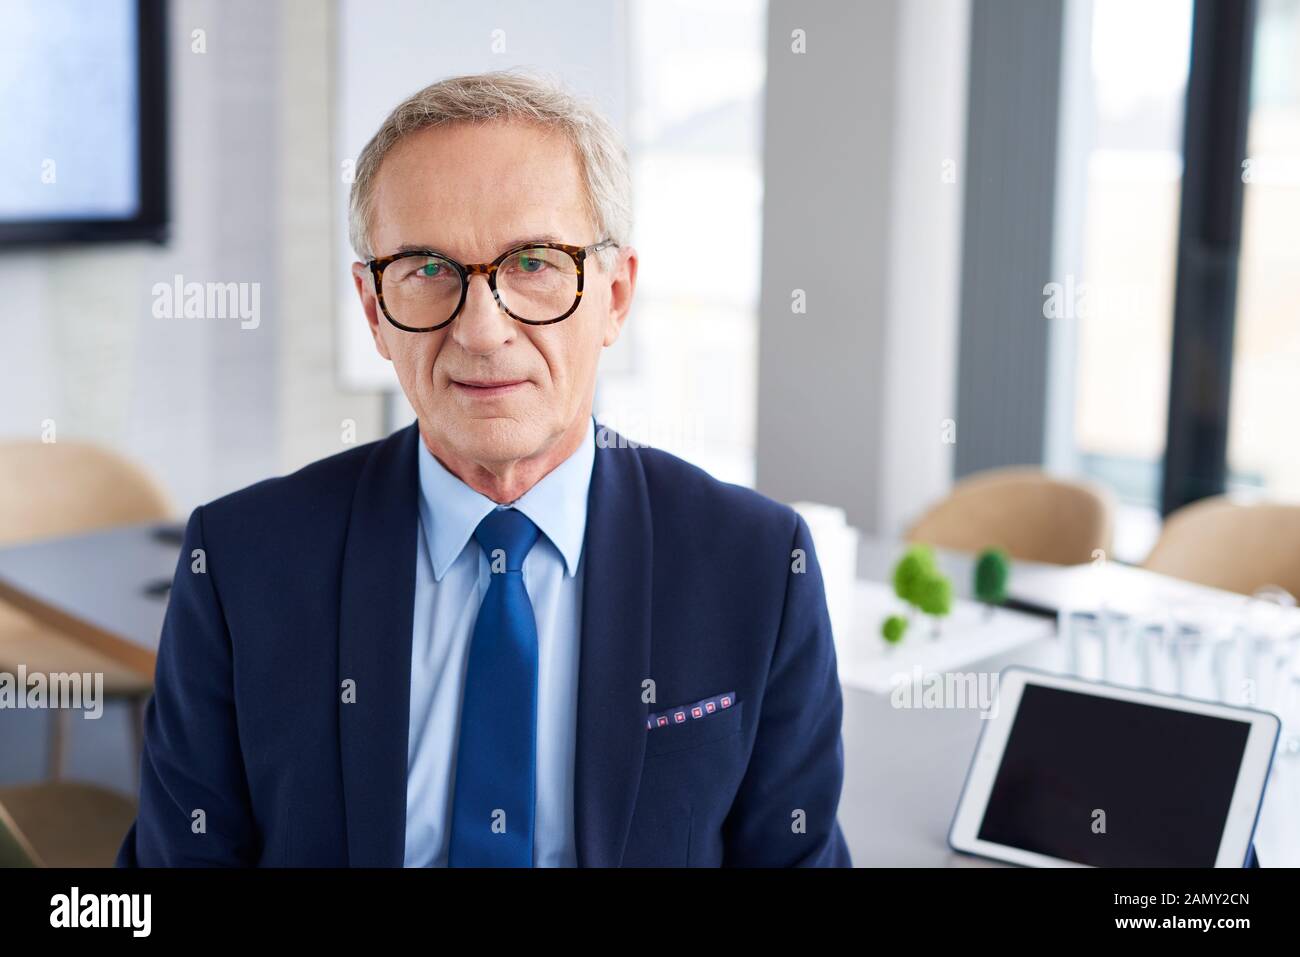 Portrait of confident businessman in conference room Stock Photo